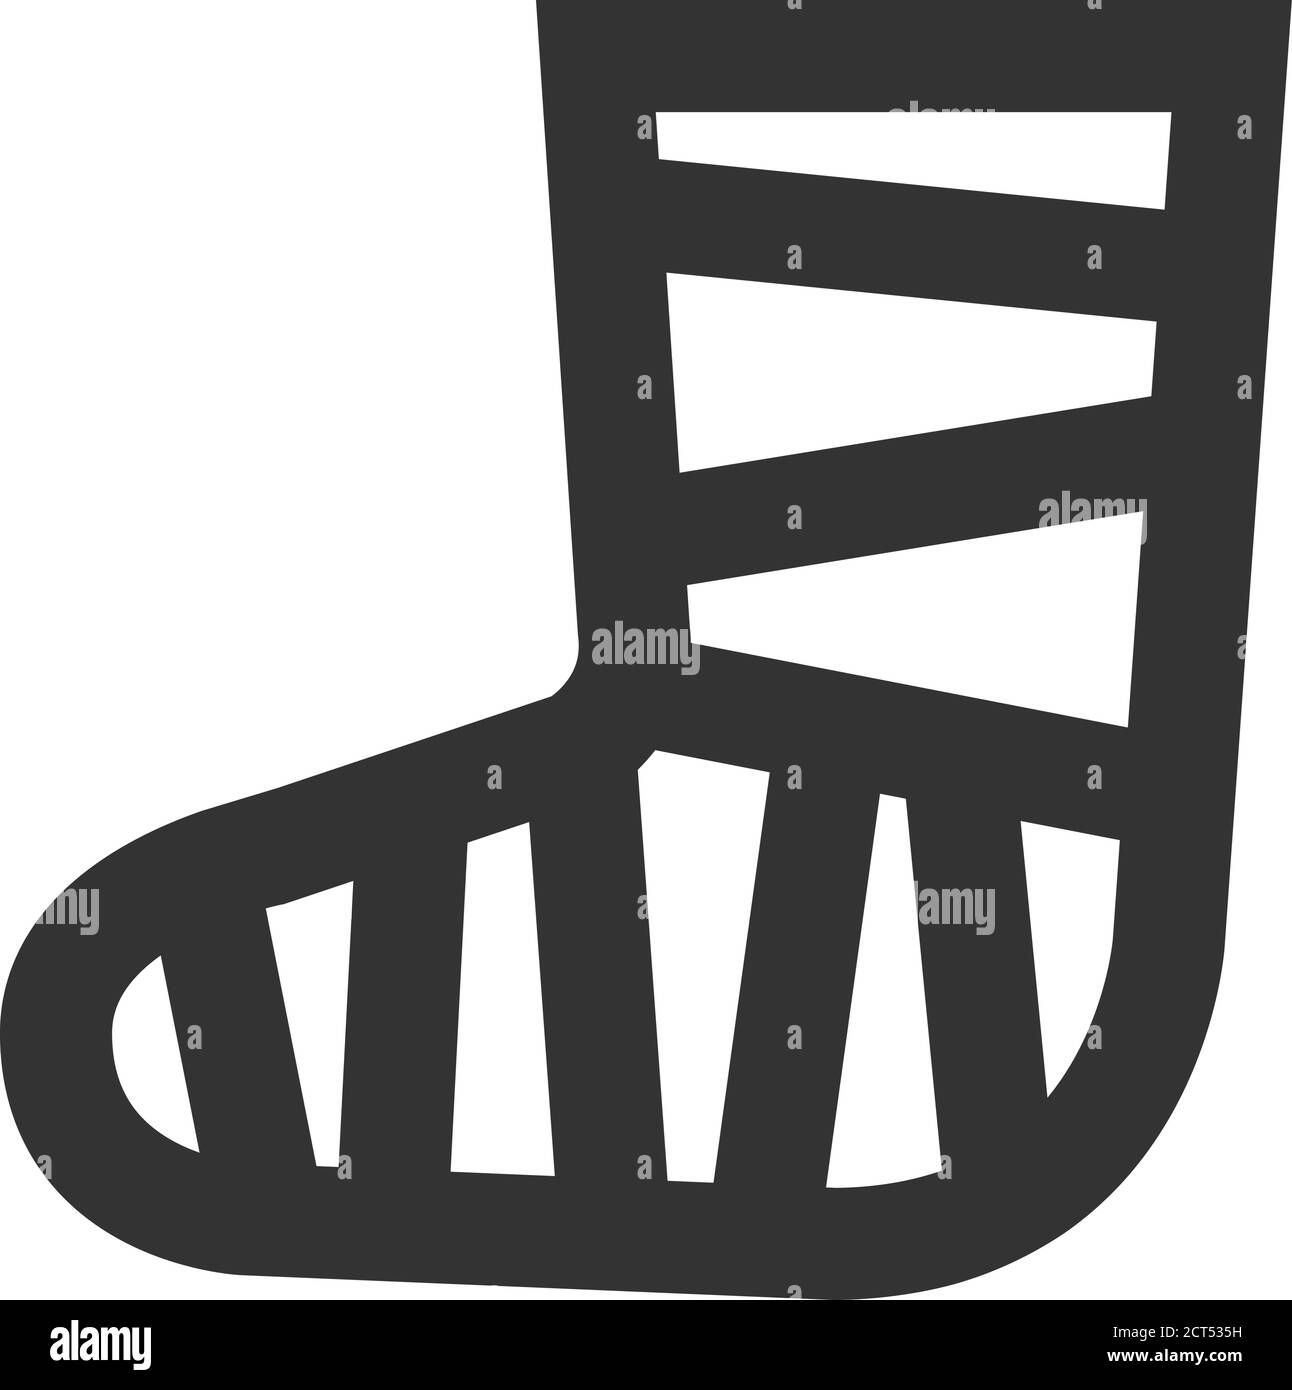 Injured foot icon in thick outline style. Black and white monochrome vector illustration. Stock Vector